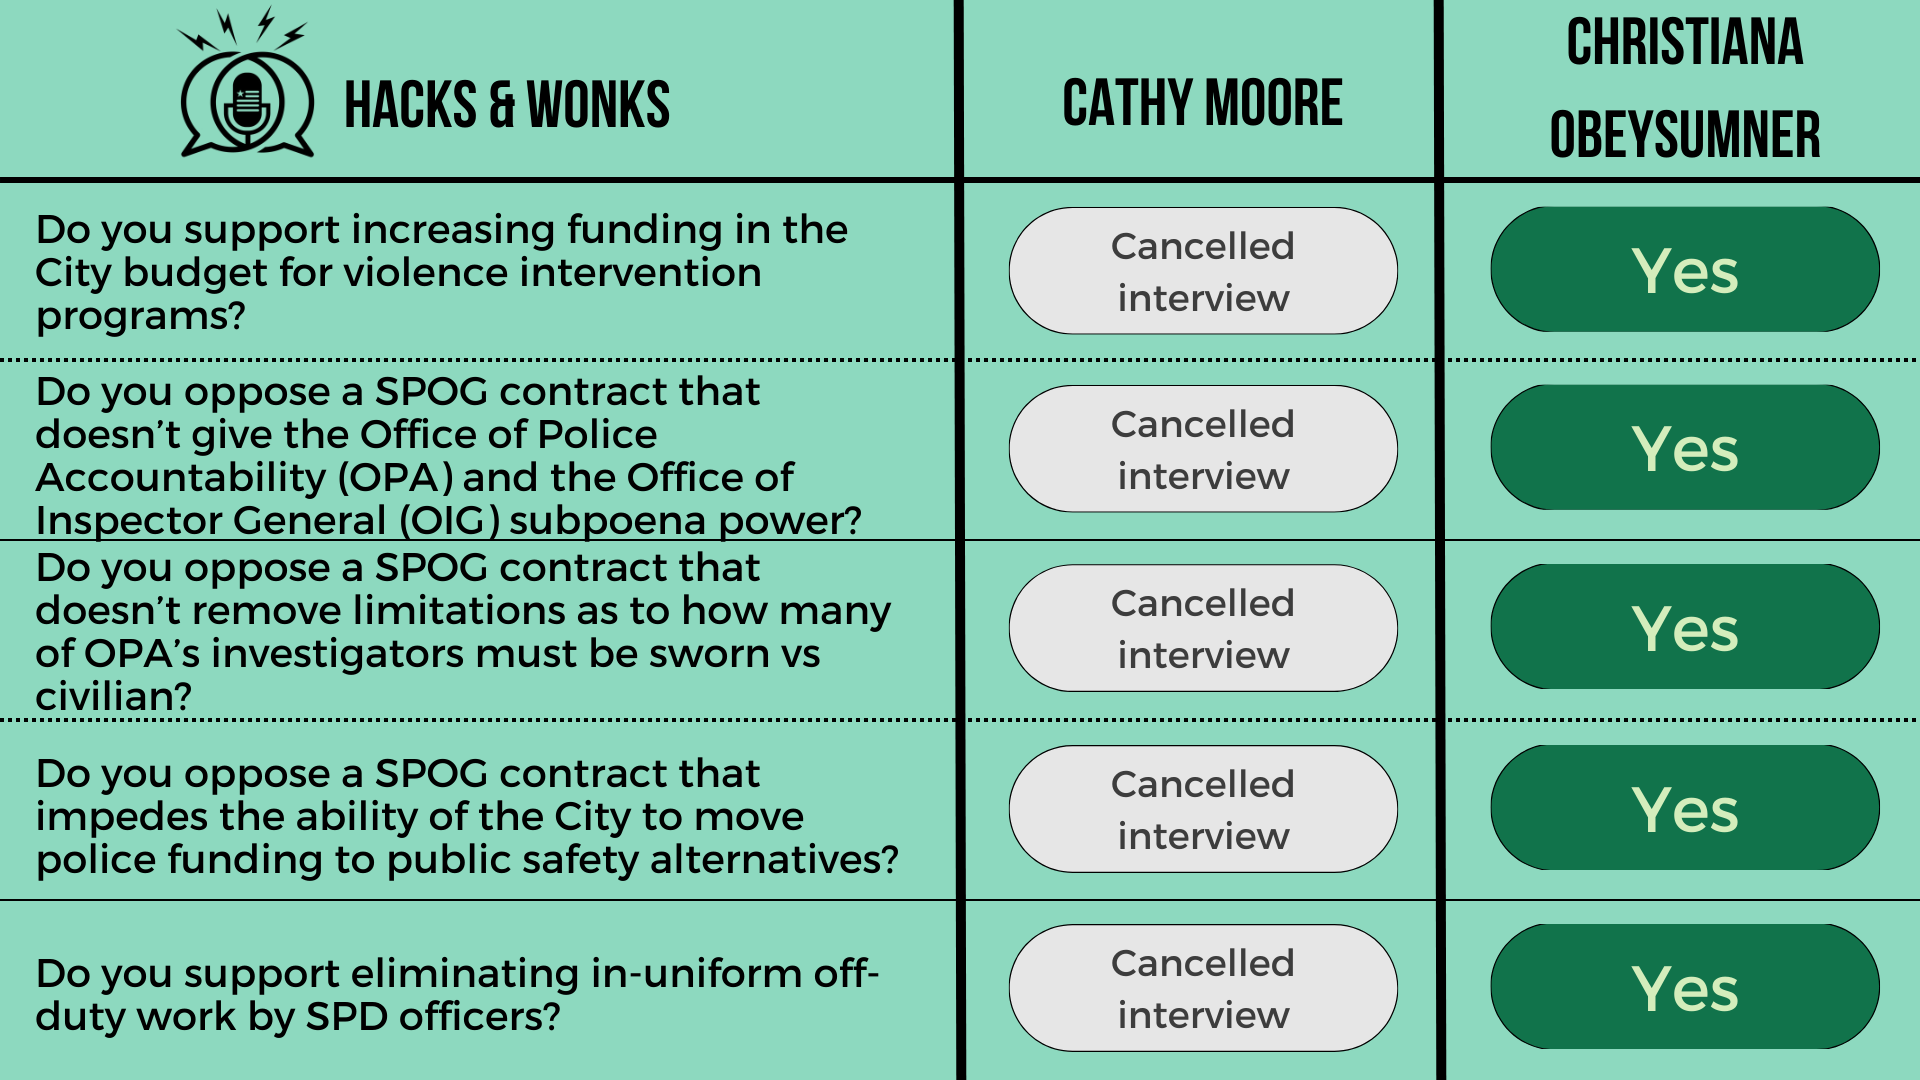 Q: Do you support increasing funding in the City budget for violence intervention programs? Cathy Moore: Cancelled interview, ChrisTiana ObeySumner: Yes  Q: Do you oppose a SPOG contract that doesn’t give the Office of Police Accountability (OPA) and